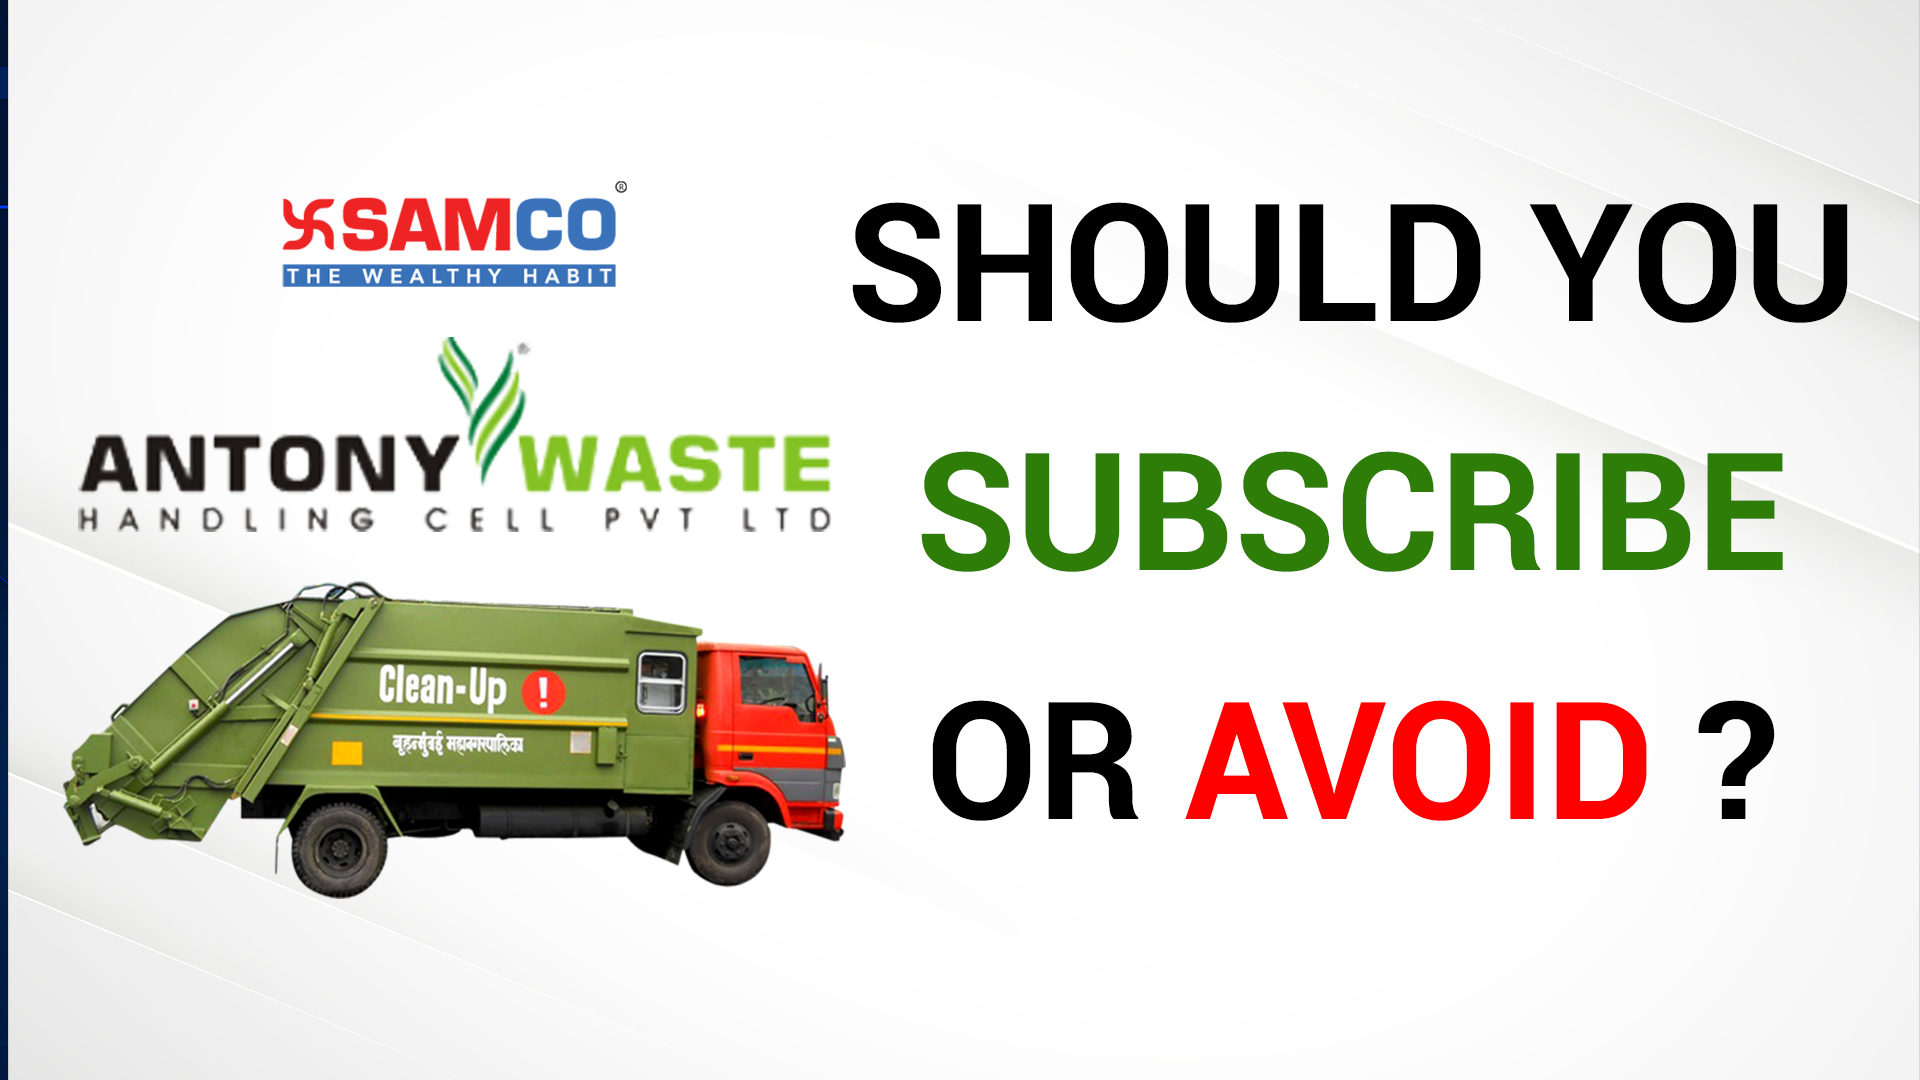 Antony Waste Management Should You Subscribe or Avoid